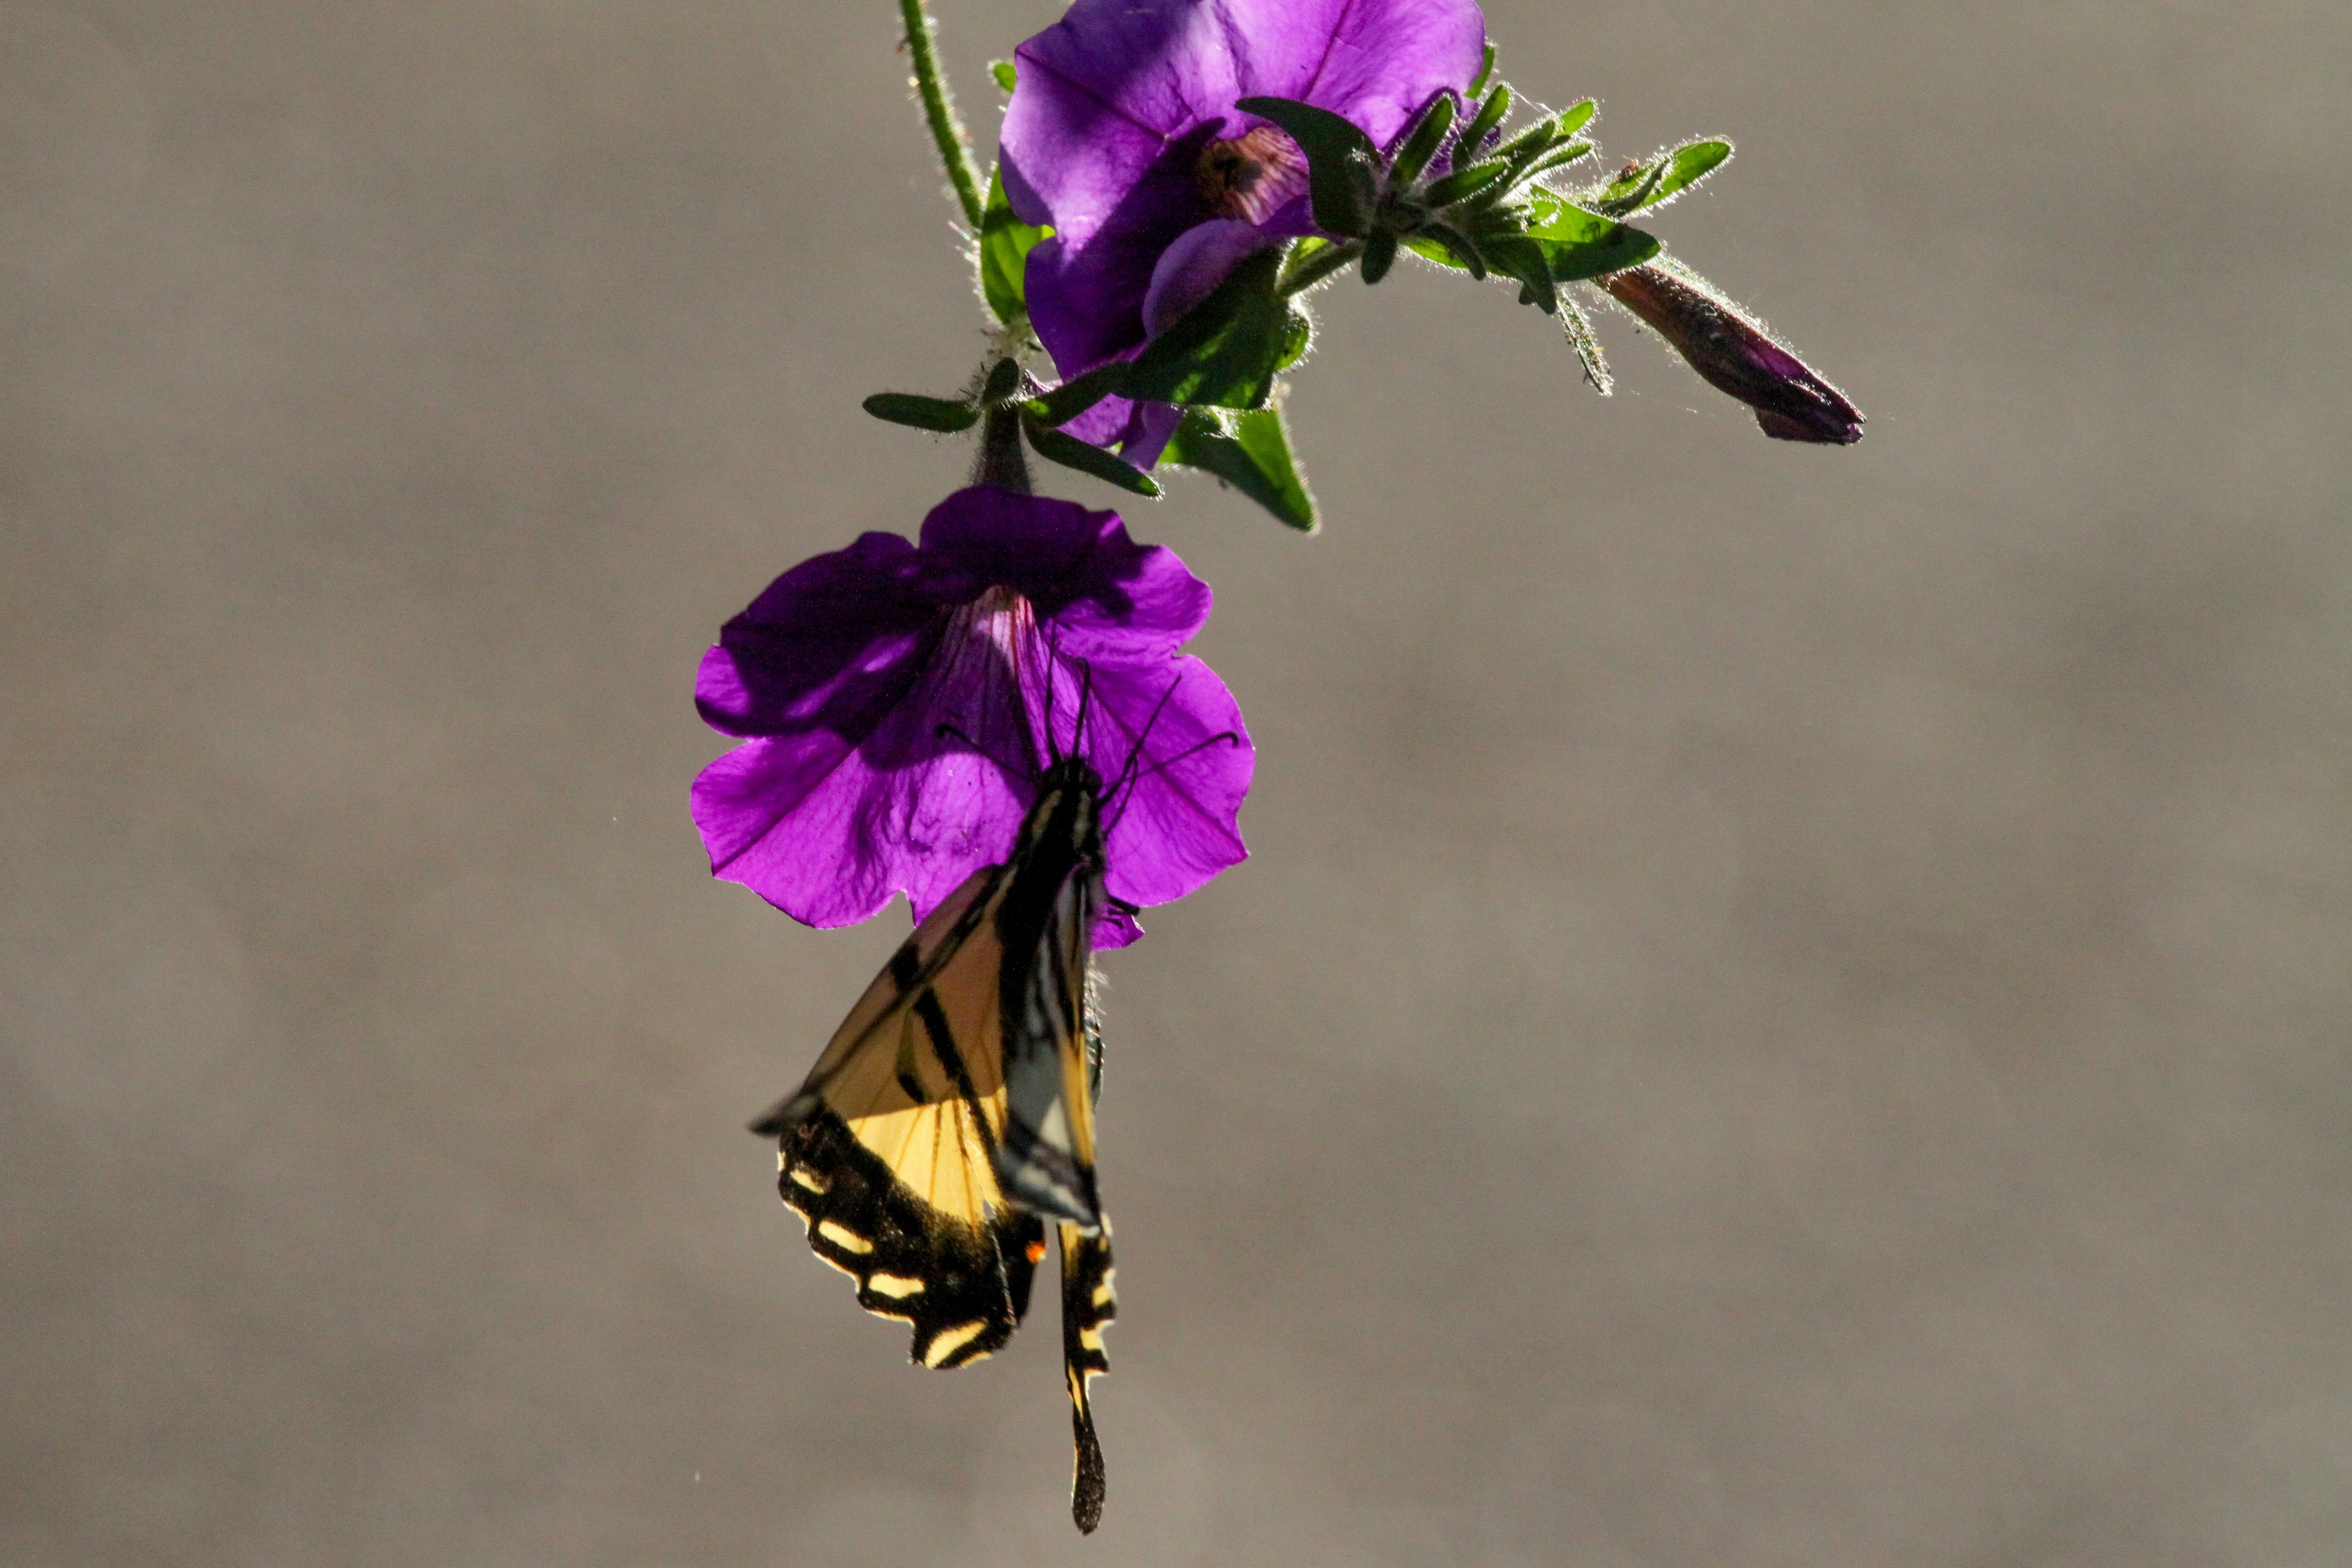 Tiger swallowtail butterfly on purple petaled flower  in selective focus photography